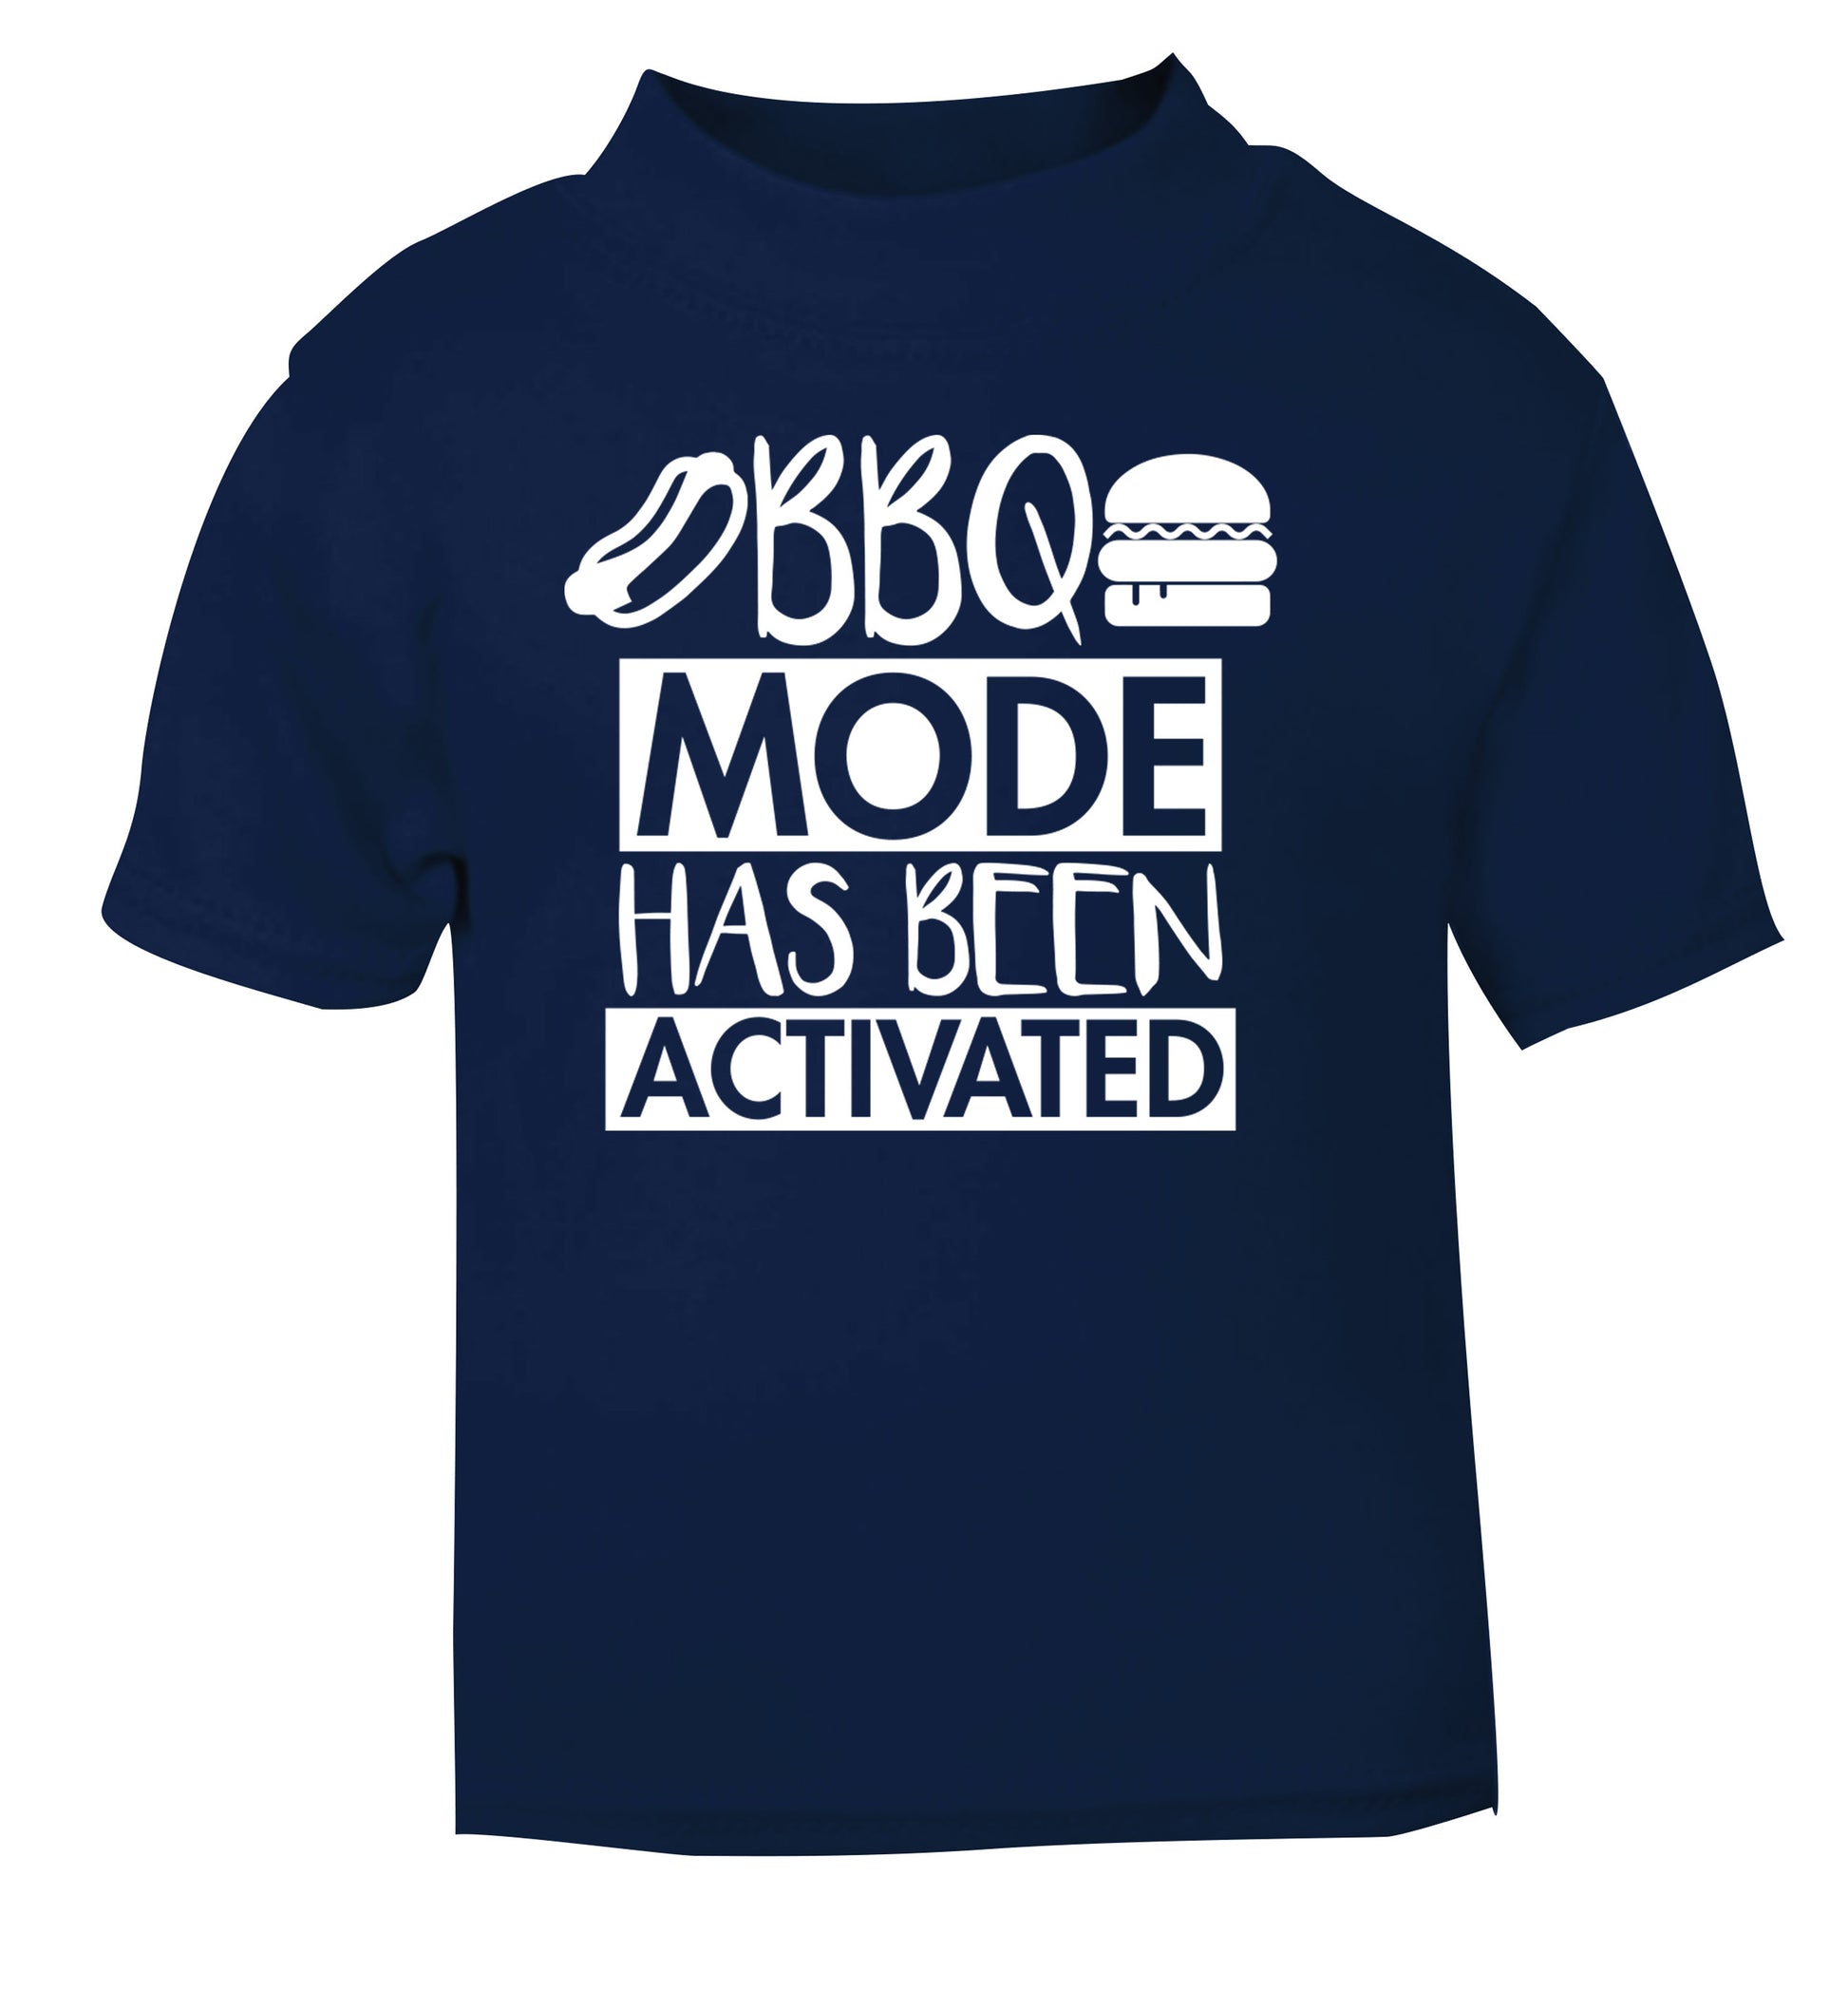 Bbq mode has been activated navy Baby Toddler Tshirt 2 Years